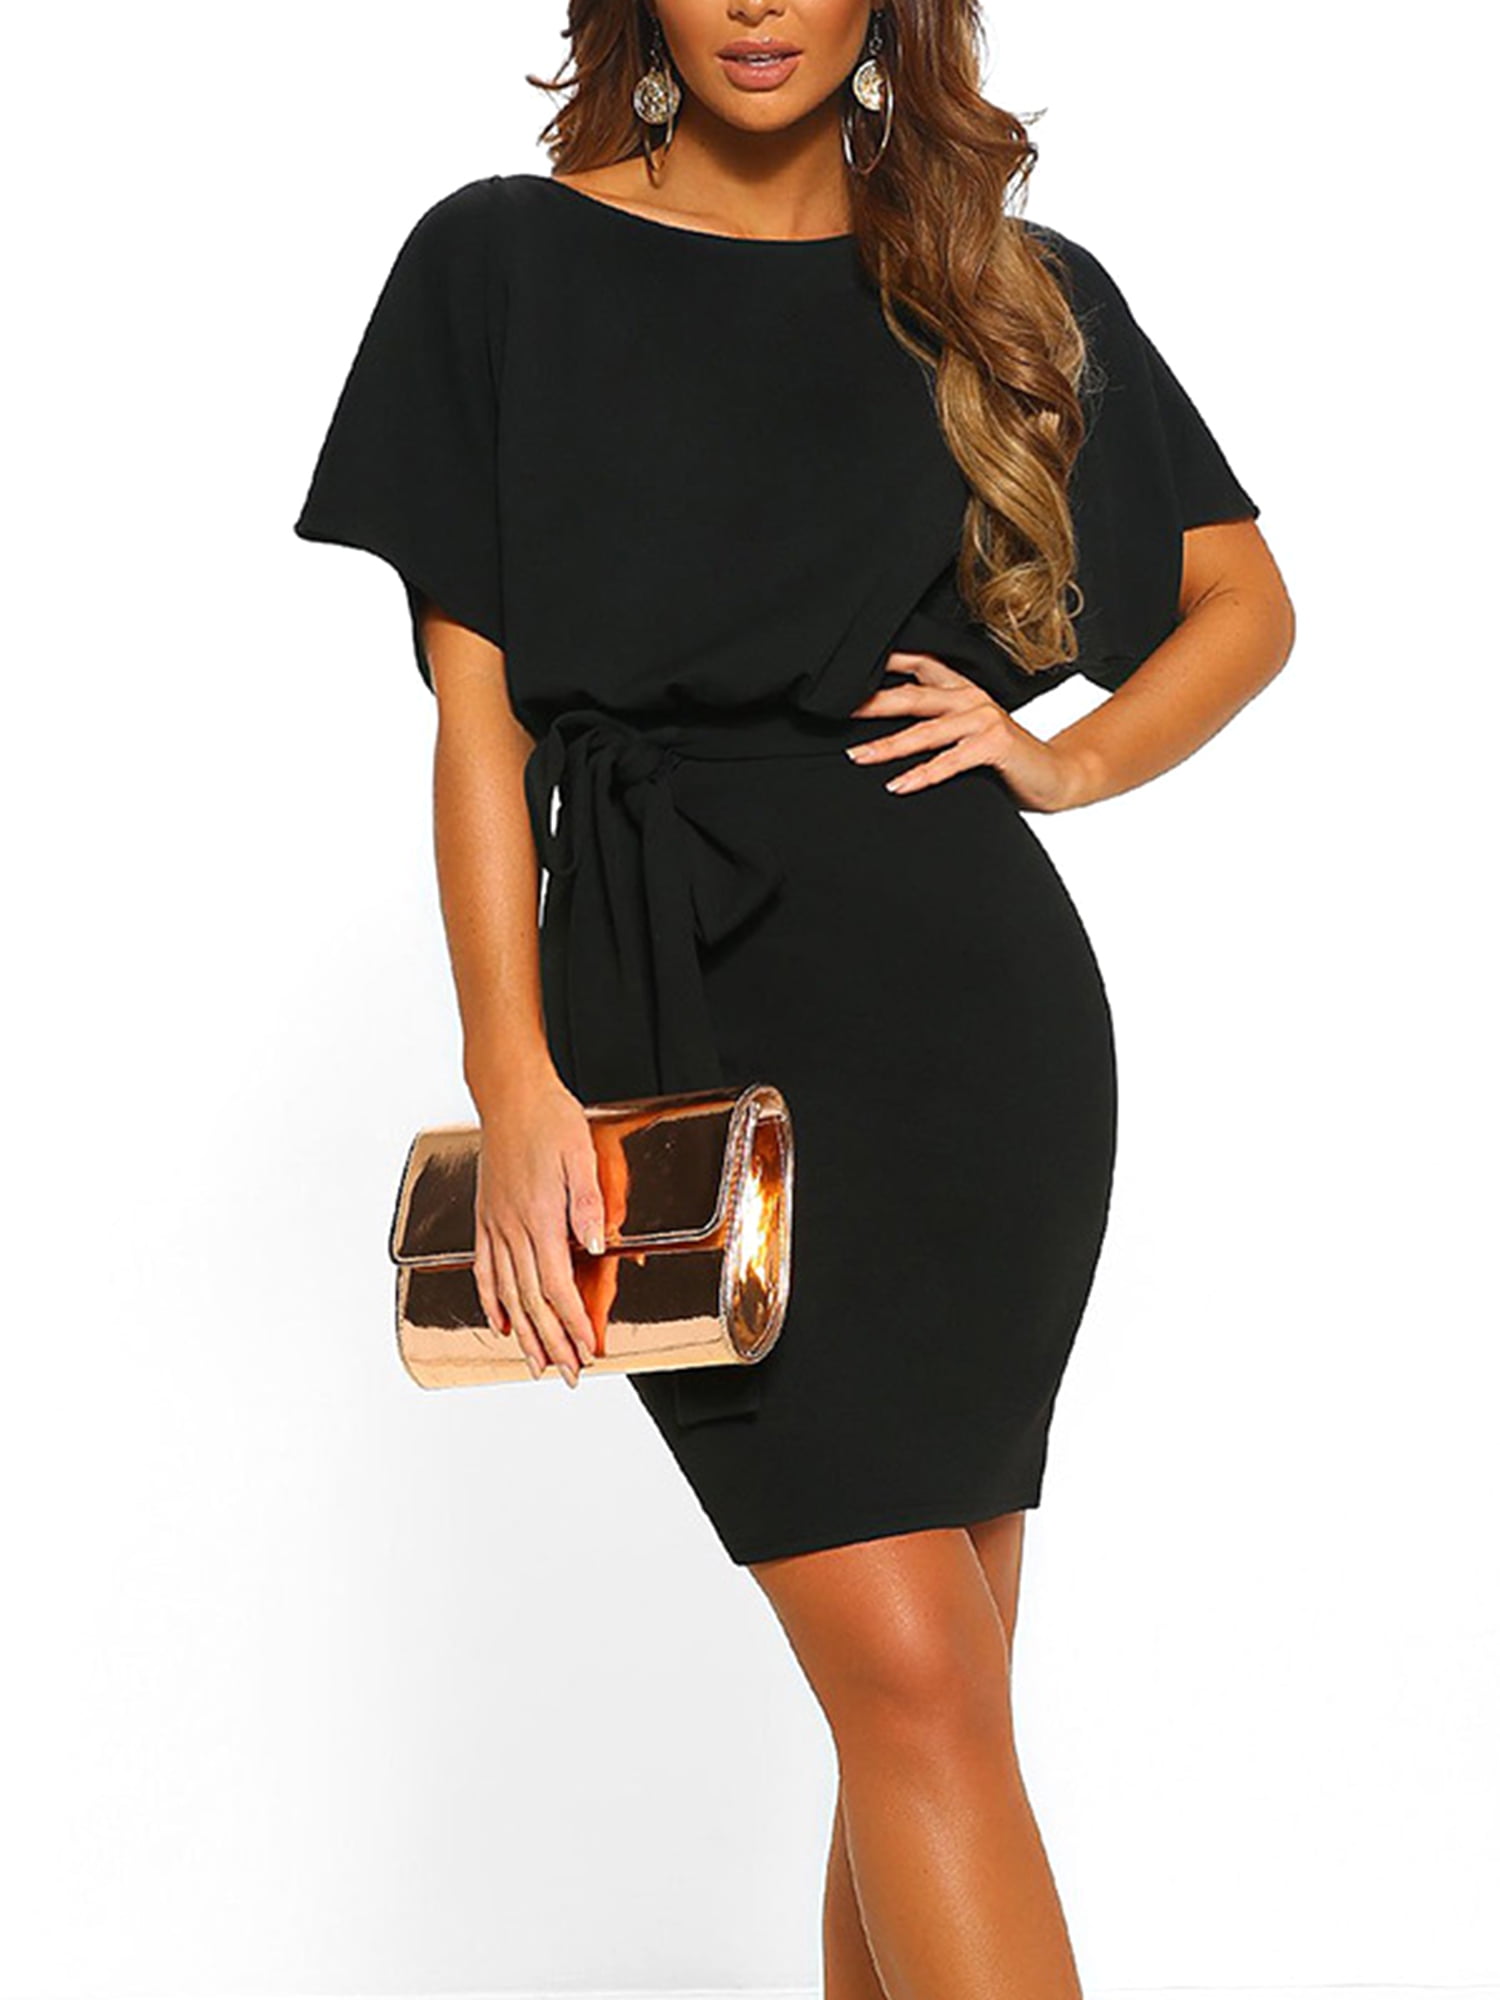 Women Boat Neck Puff Sleeves Bodycon Cocktail Party Evening Casual Dress